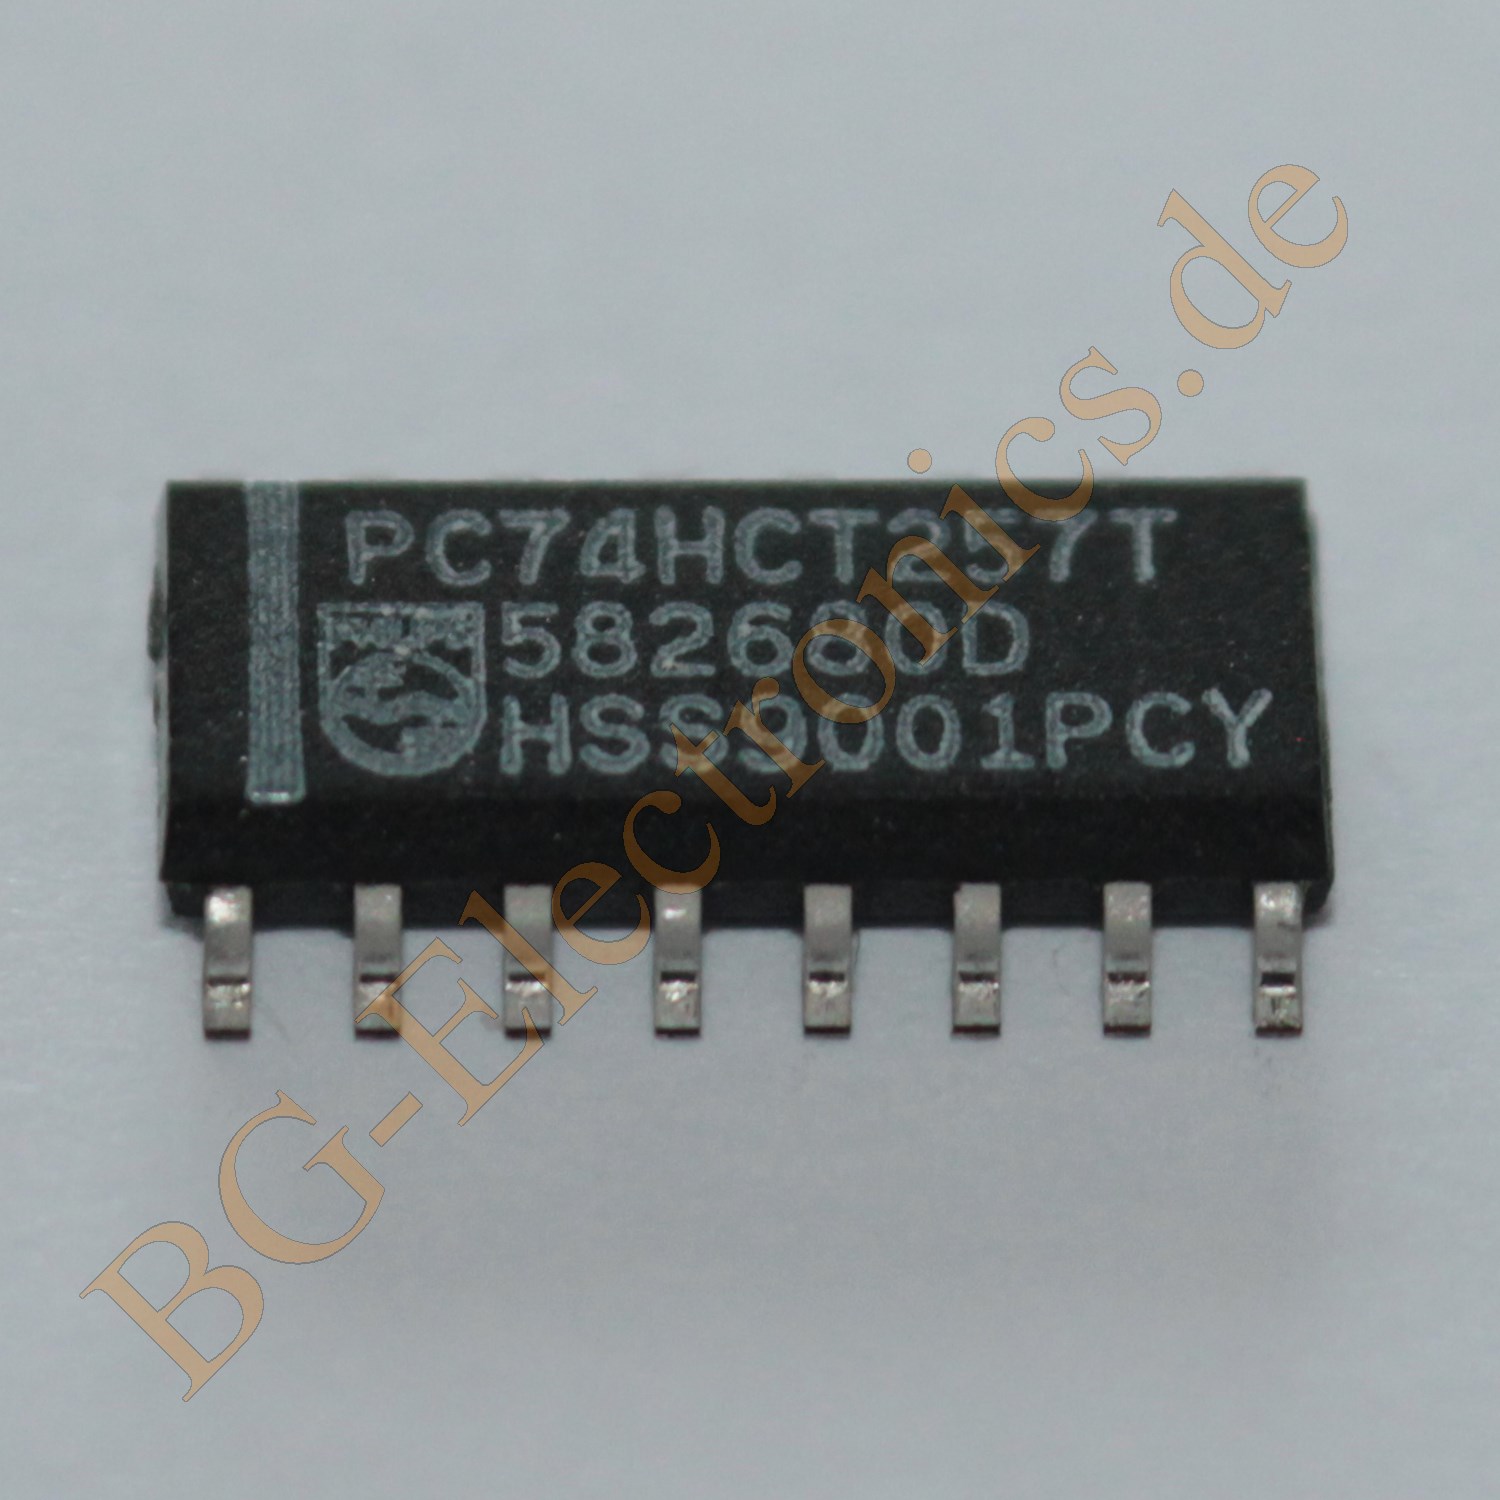 PC74HCT257T